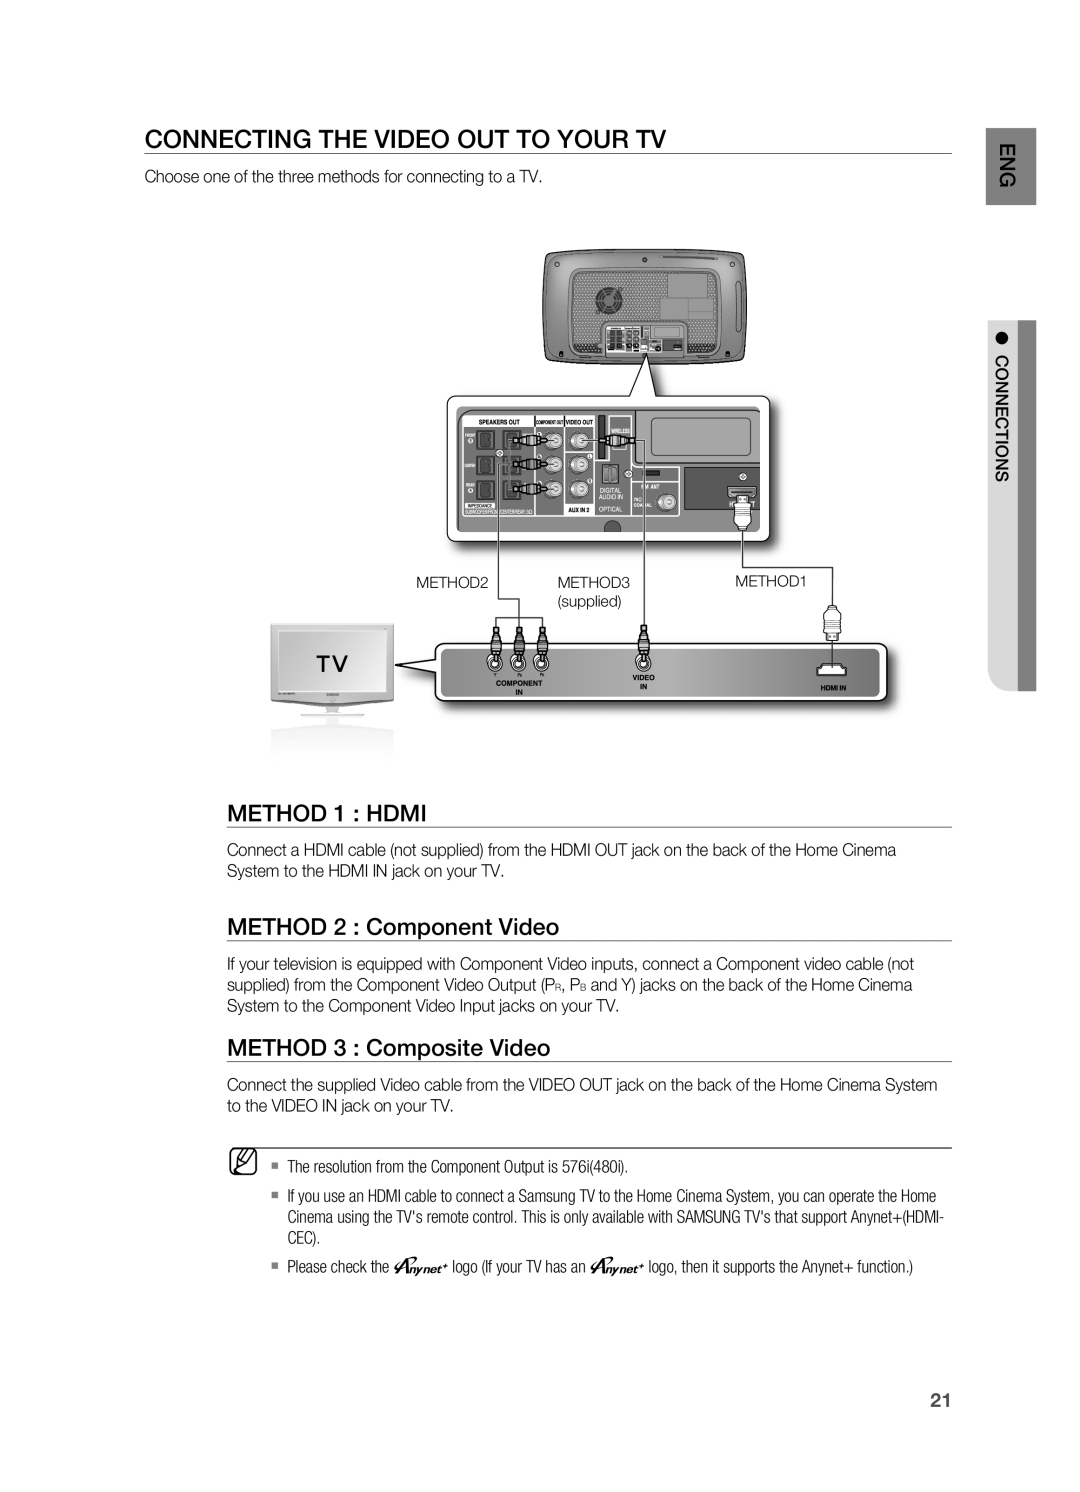 Samsung HT-X725G, HT-TX725G user manual CONNECTING THE VIDEO OUT TO YOUr TV, METHOD 1 : HDMI, METHOD 2 : Component Video 